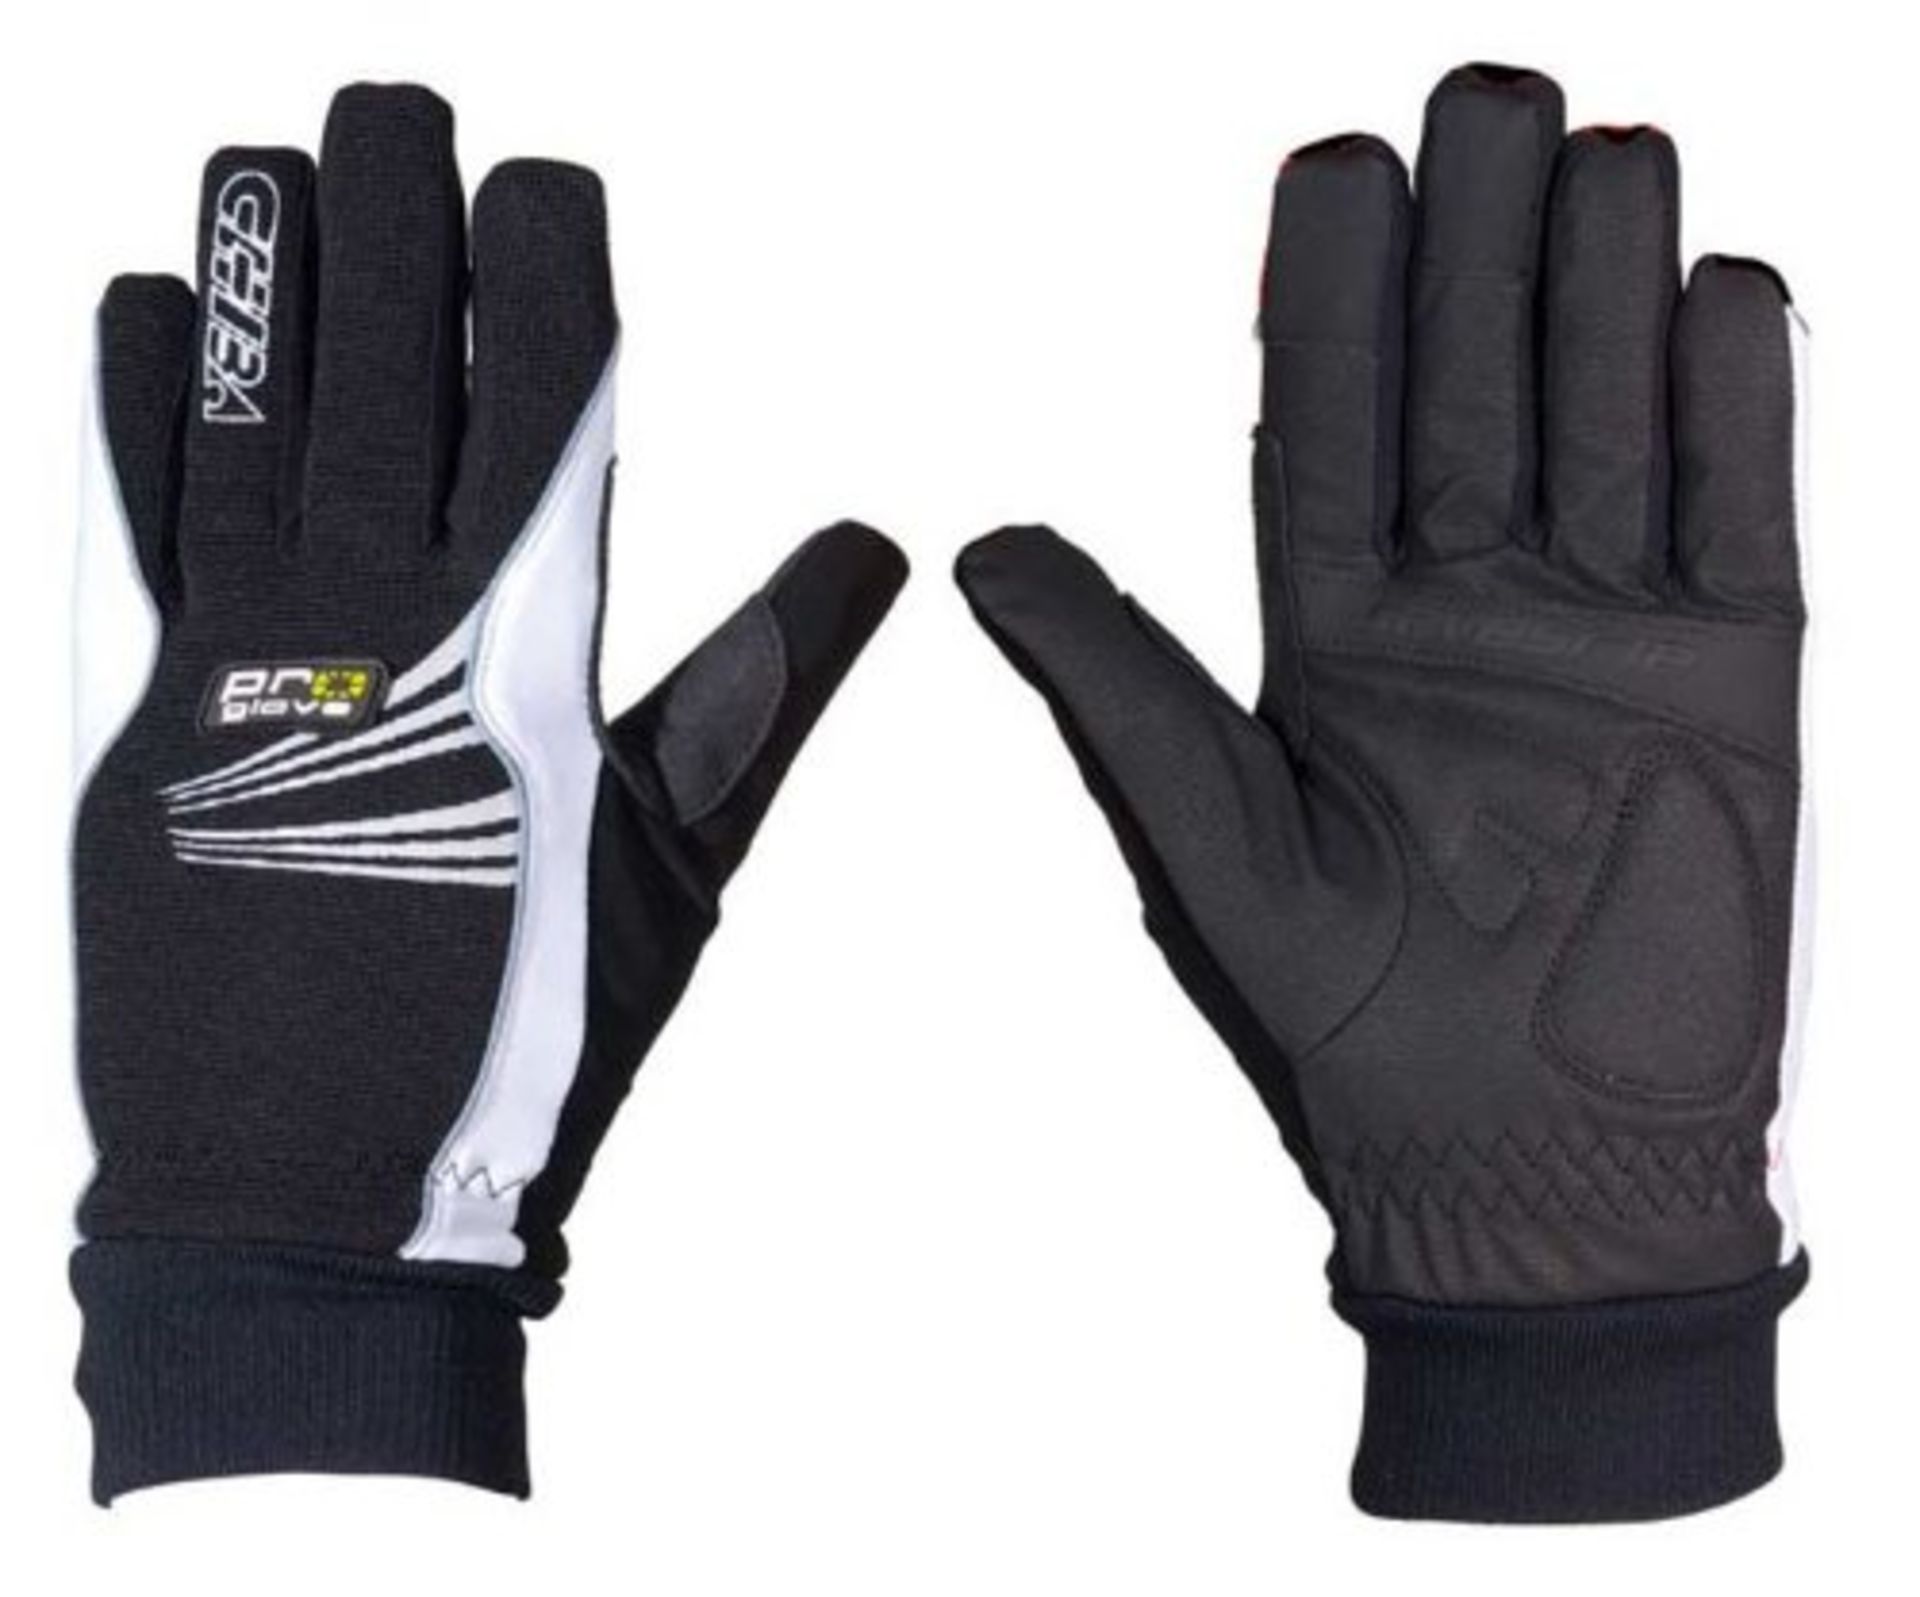 10 x Pairs of Men's Cycling Gloves | Total RRP £73.55 | See Description for Details - Image 2 of 6